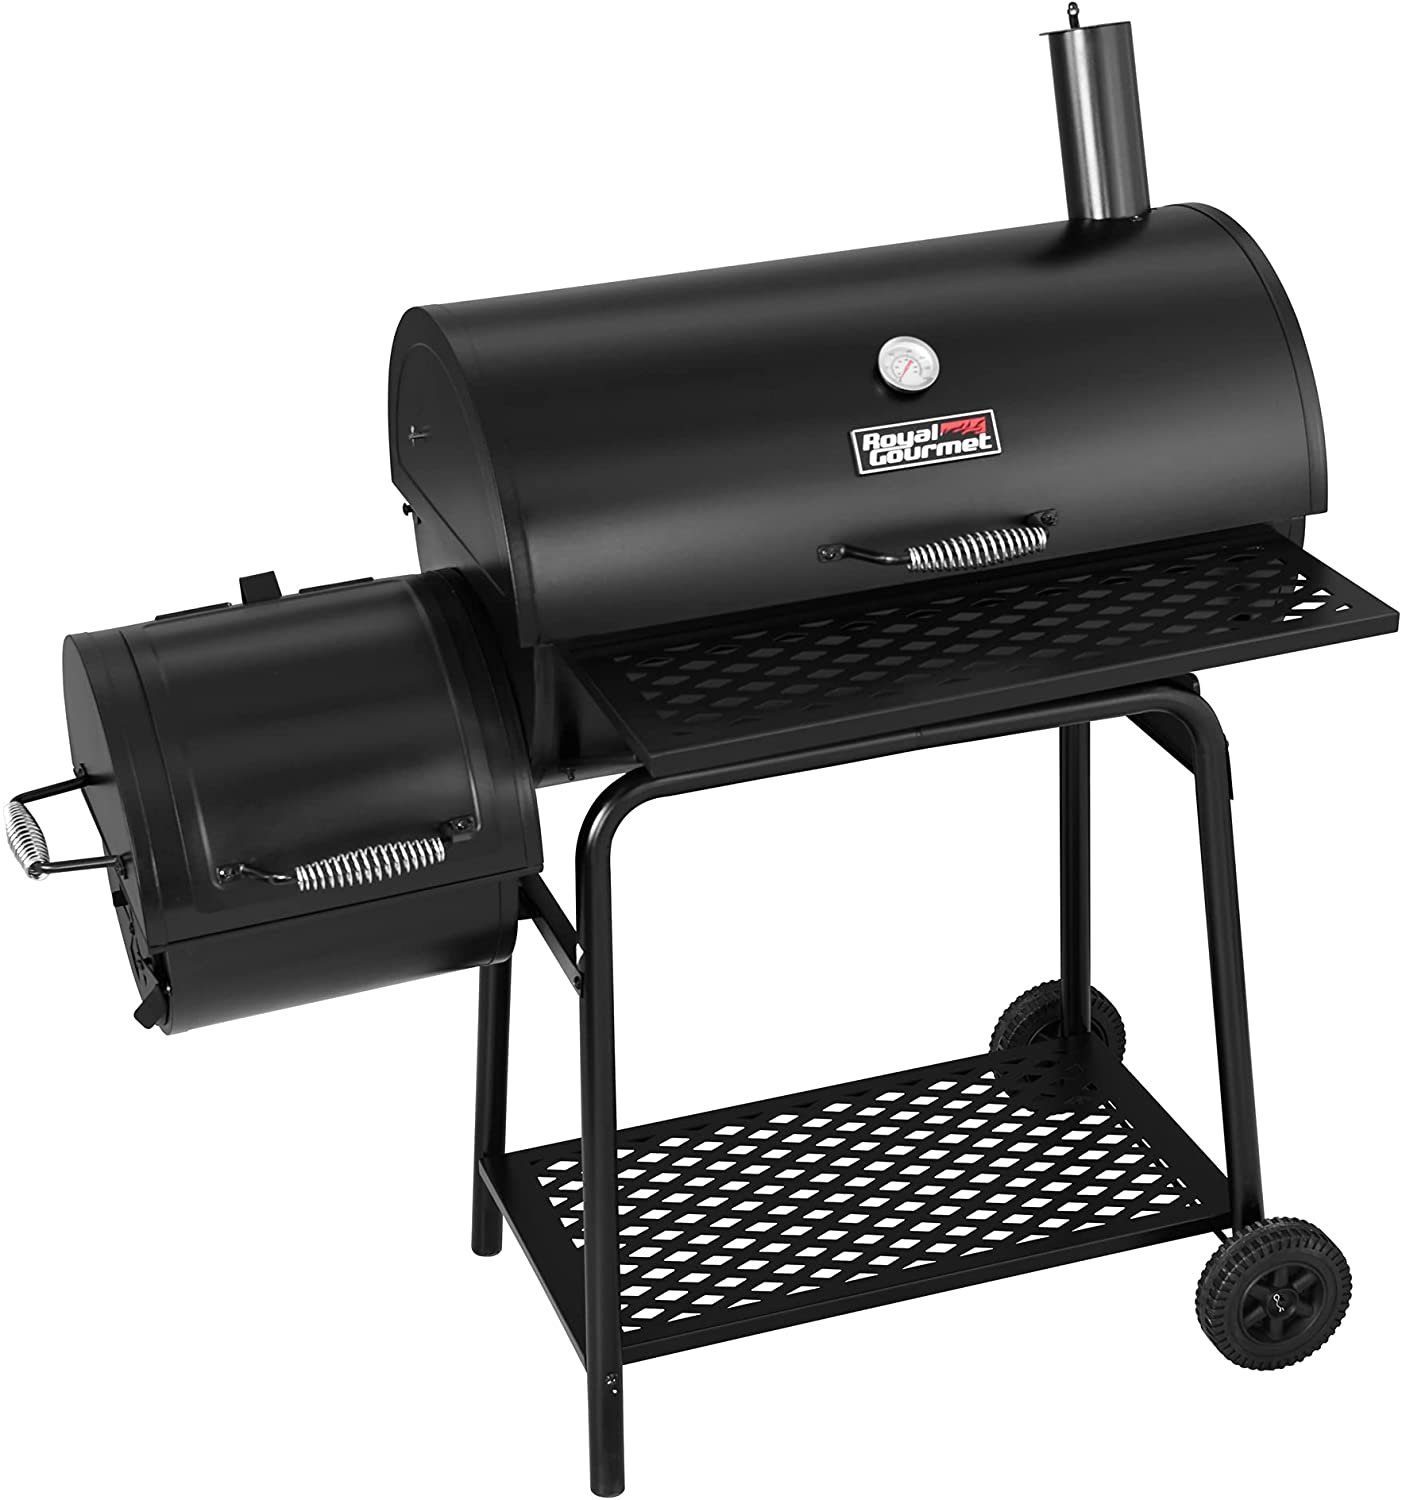 Top 7 Most Charcoal Grills Under 300 Reviewed 2021